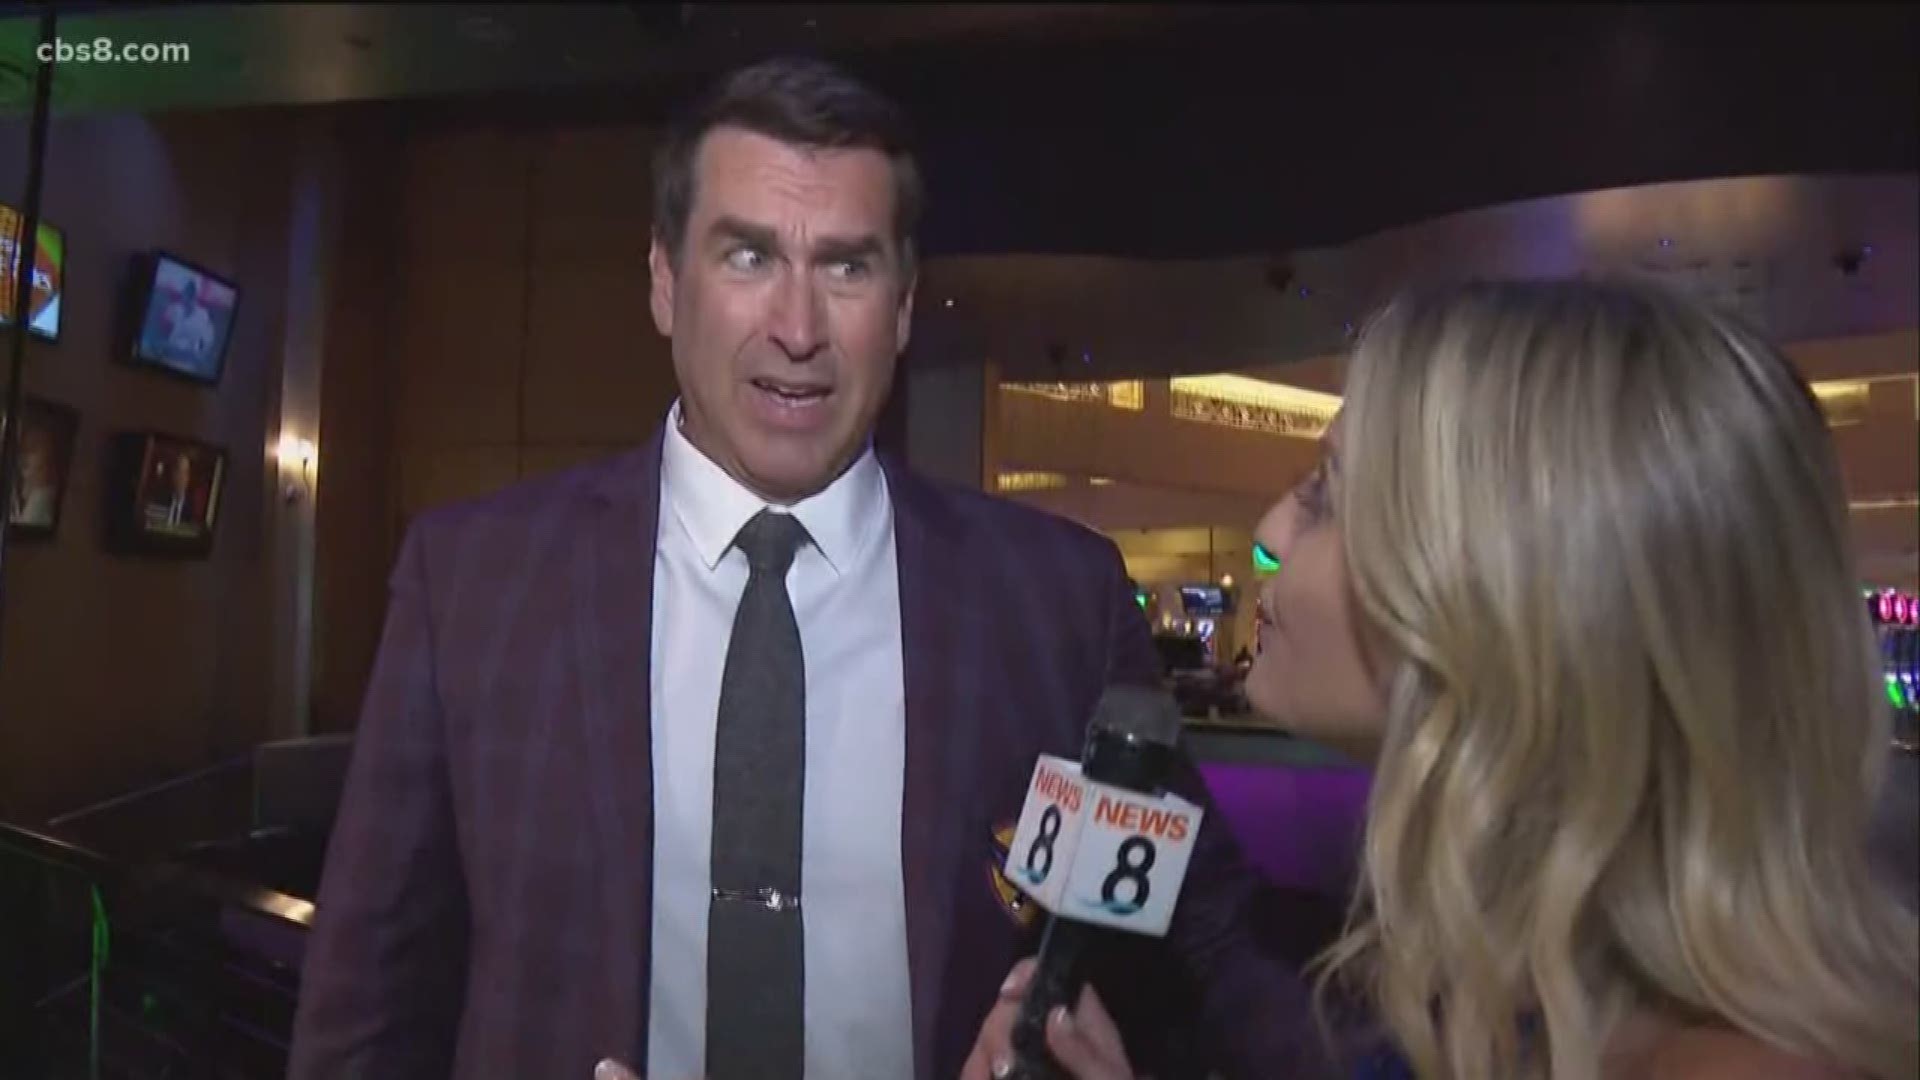 New mayor of Funner, Rob Riggle tries his hand at Zombie golf